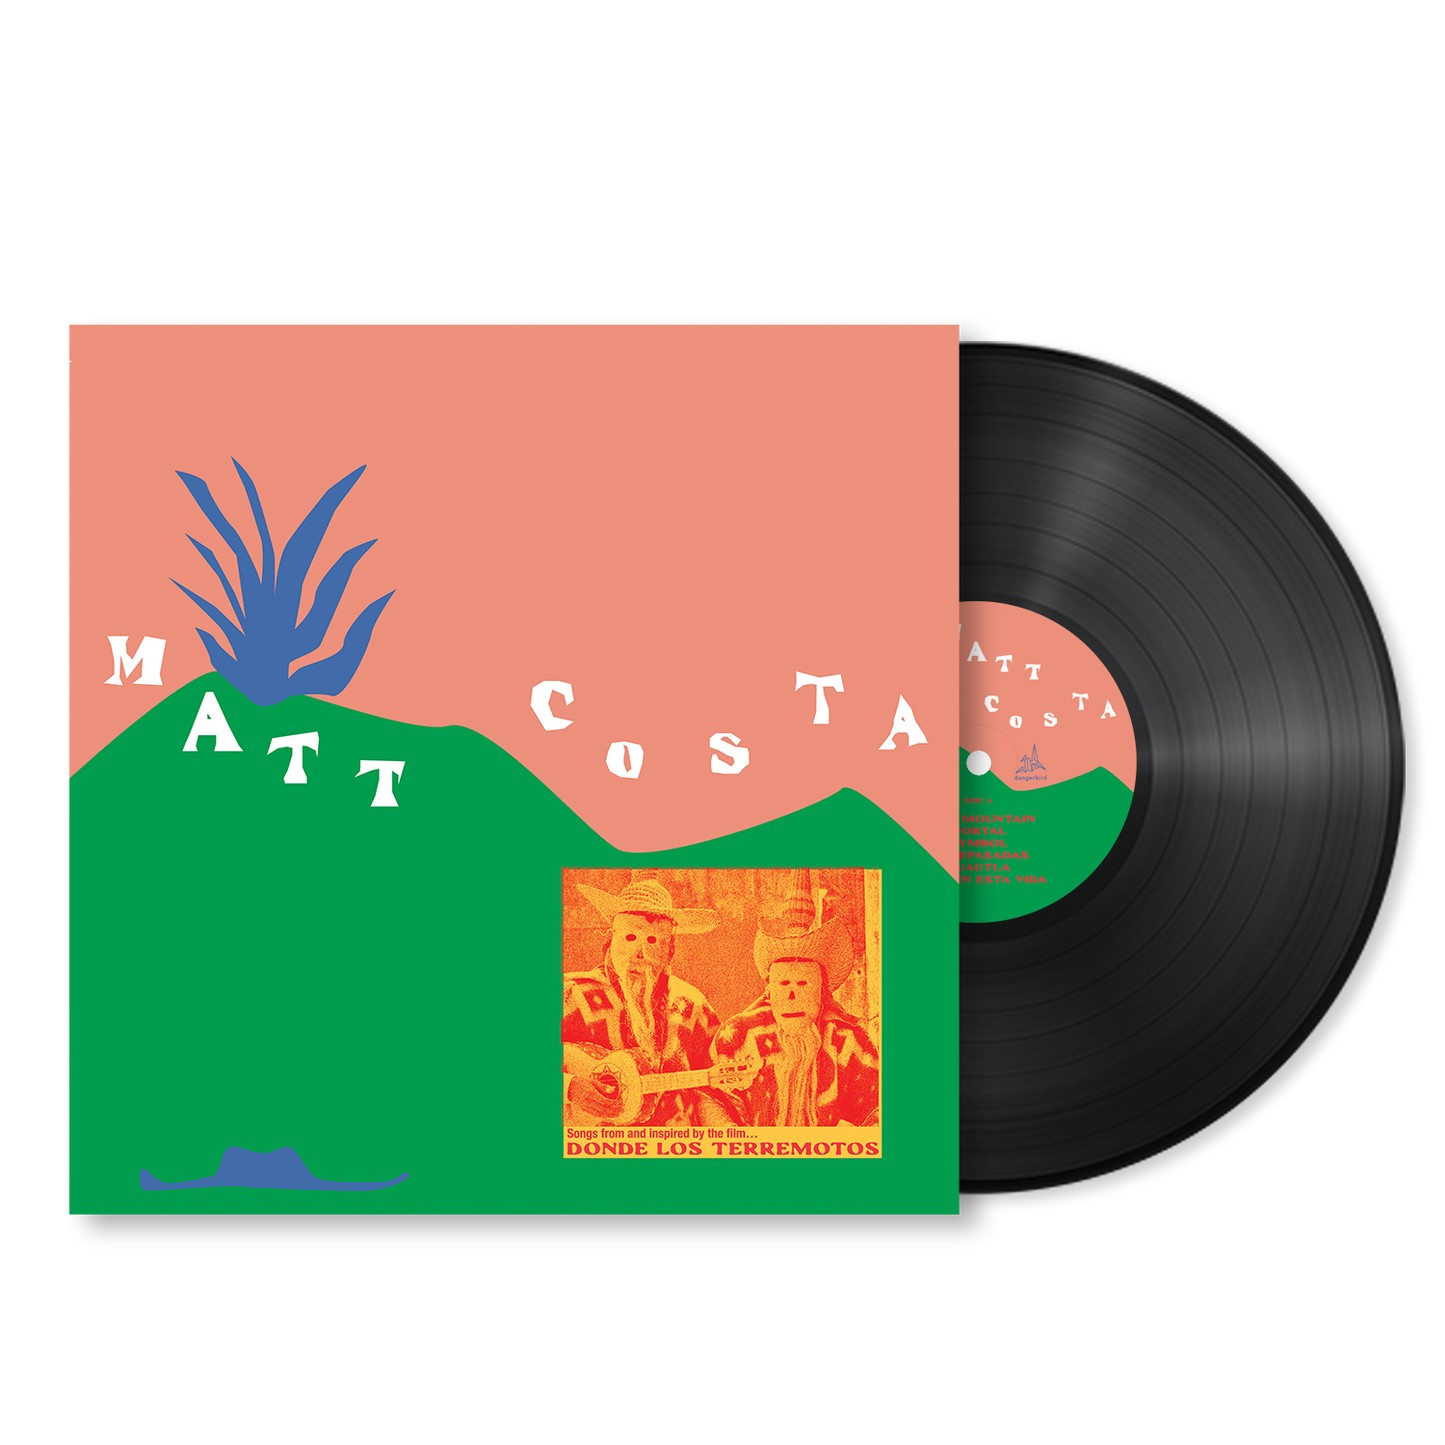 Matt Costa - Donde Los Terremotos: Songs from and Inspired by the Film - Vinyl LP